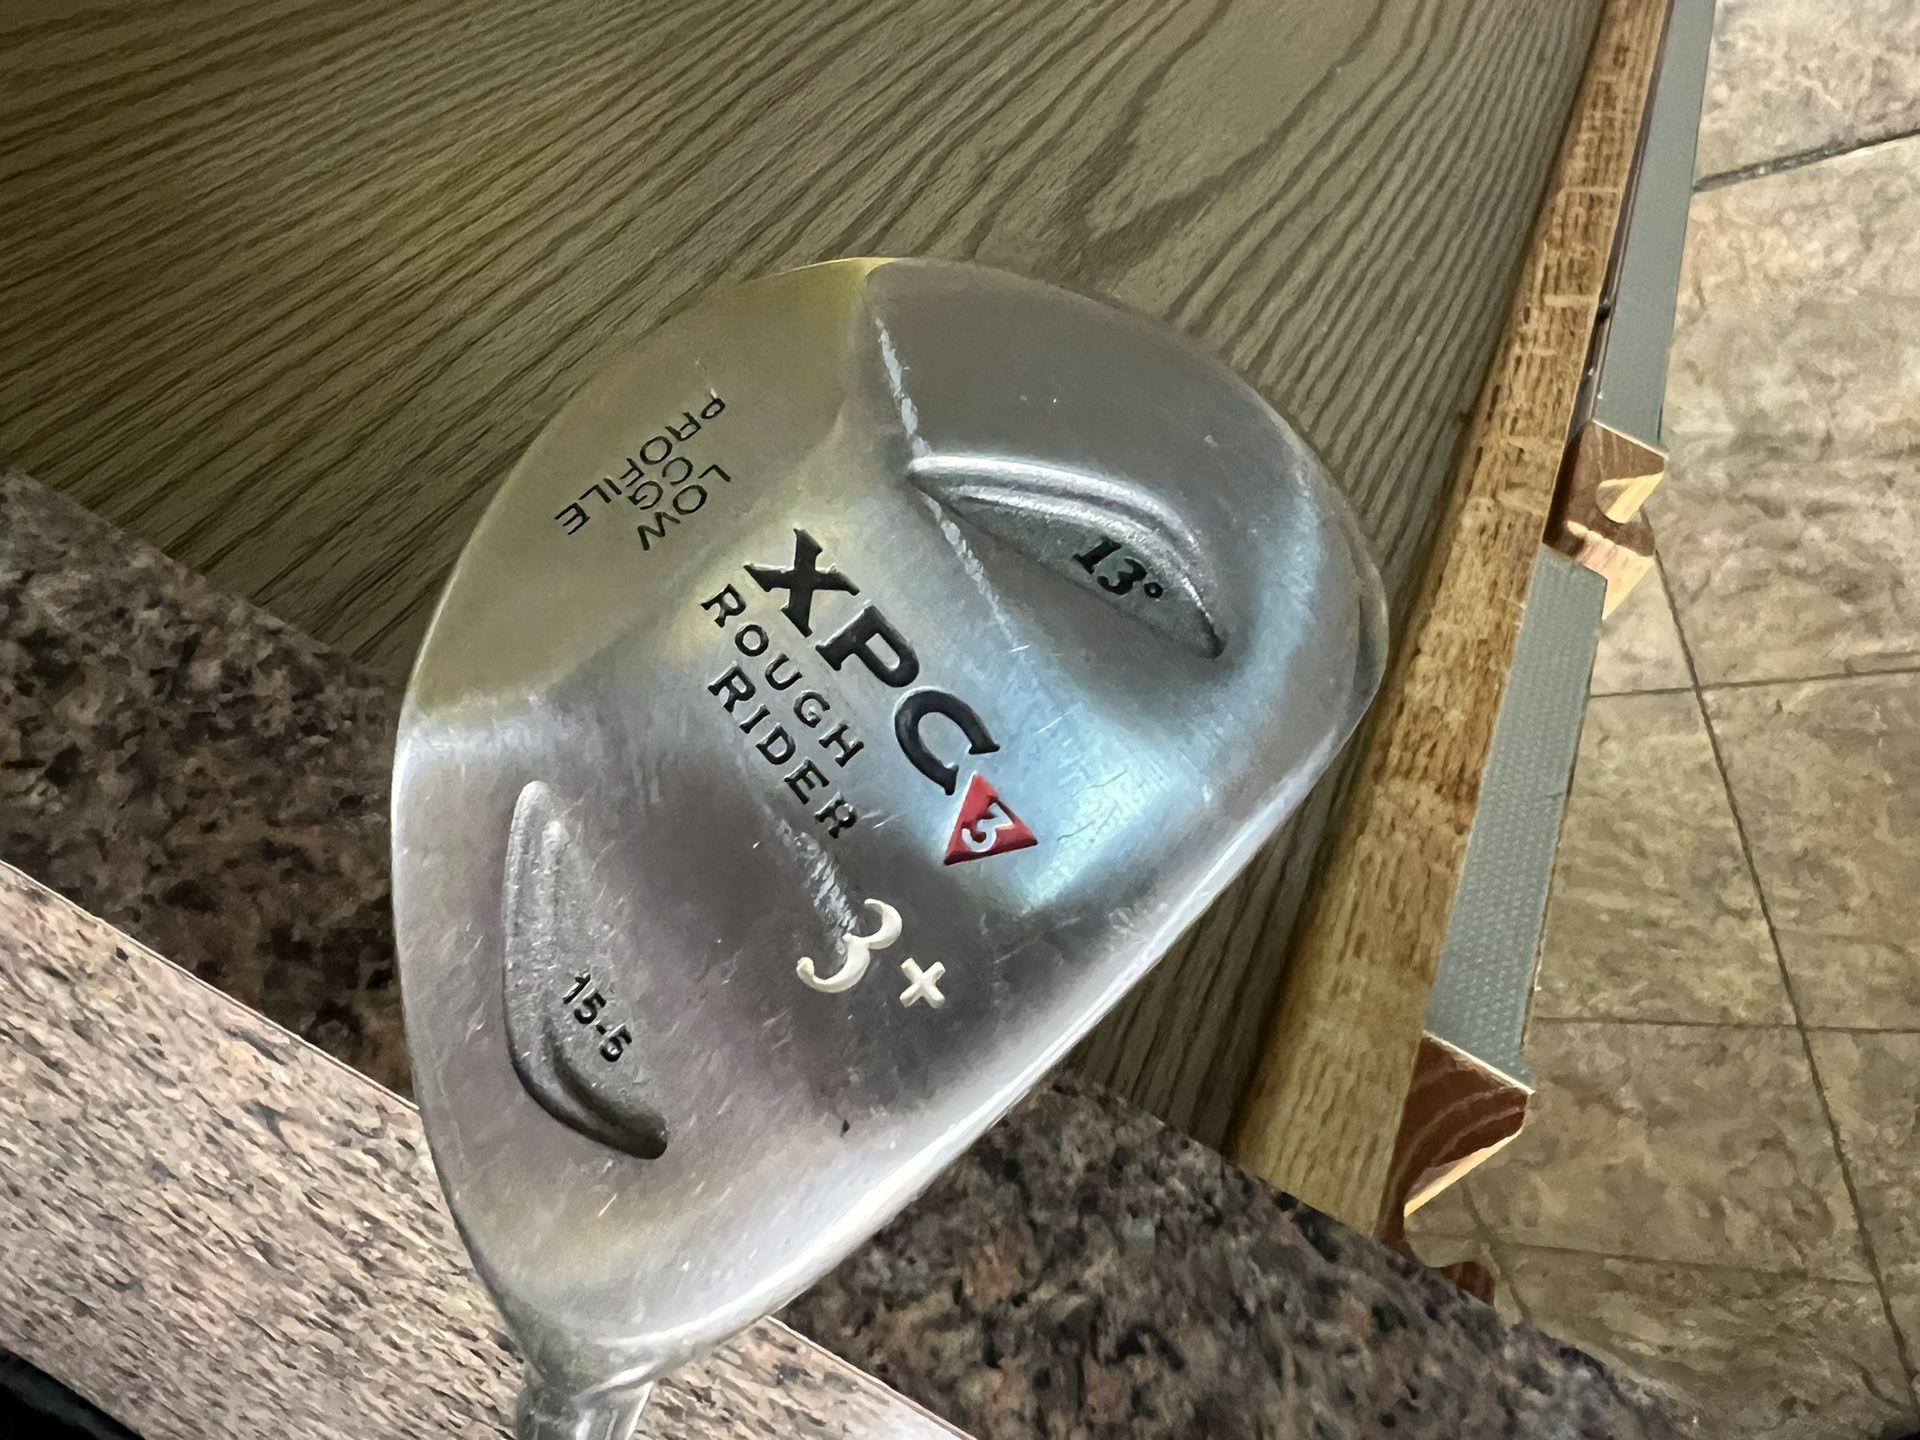 Golf, unique club, rough rider, 13° low profile, GR888 grips and grooves, $59